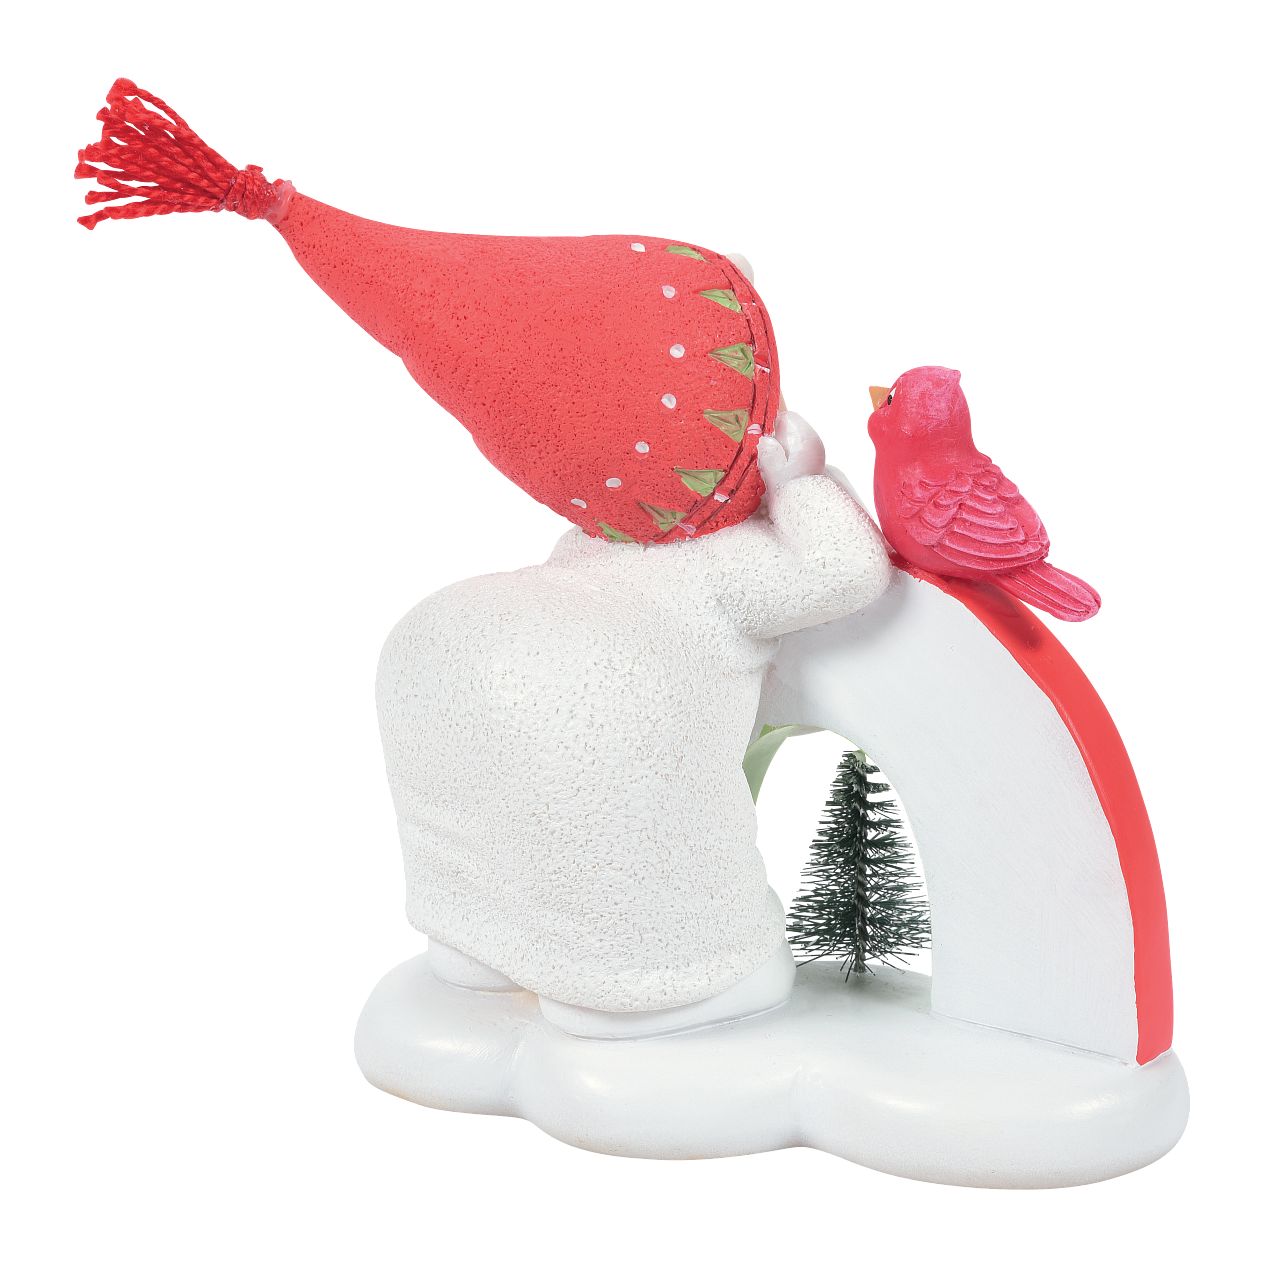 Department 56 Snowpinions Christmas Snow Gnome With Rainbow  This cute Snow Gnome with Rainbow. Hand crafted from high quality cast stone, they have been hand painted by our in-house artists to ensure a high level of detail. This Snow Gnome even has a real tassel atop his pink hat. This is the perfect festive gift or accessory.